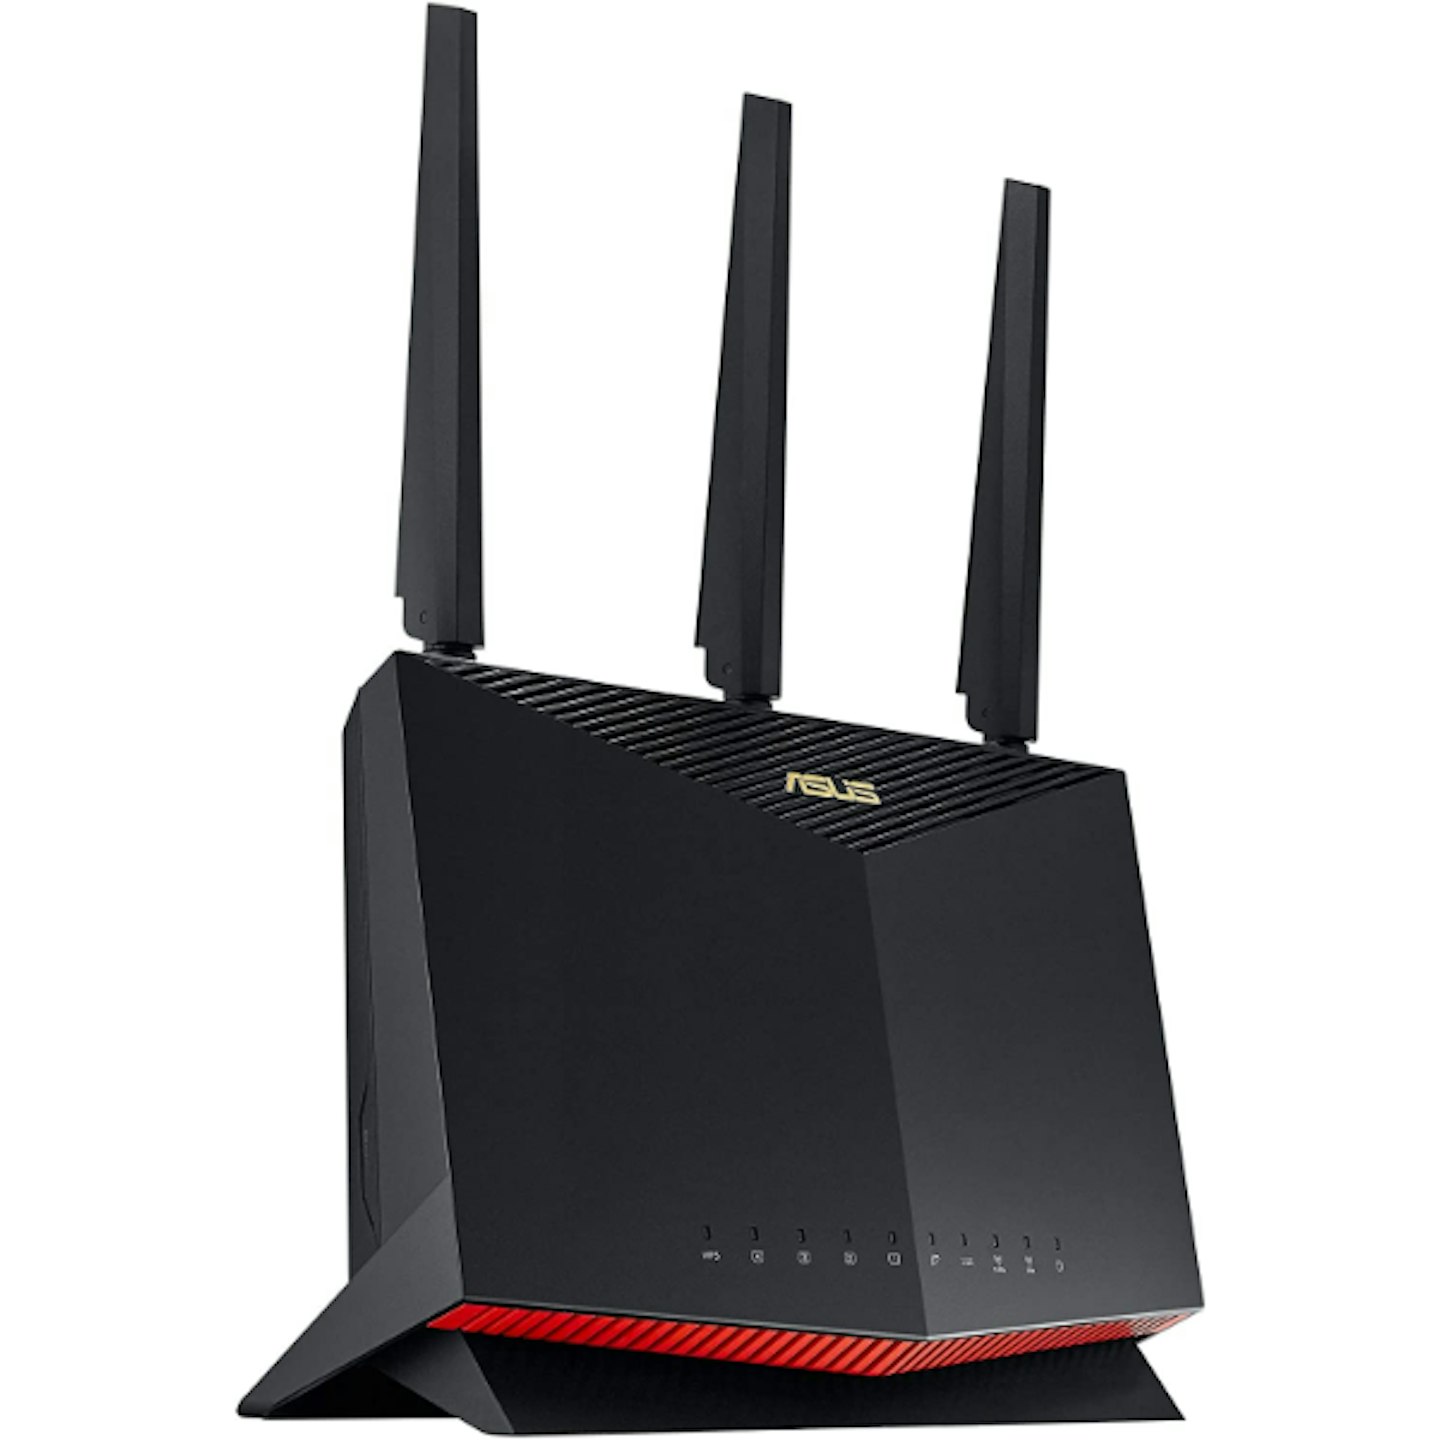 ASUS RT-AX86U 5700 Wireless Gaming Router